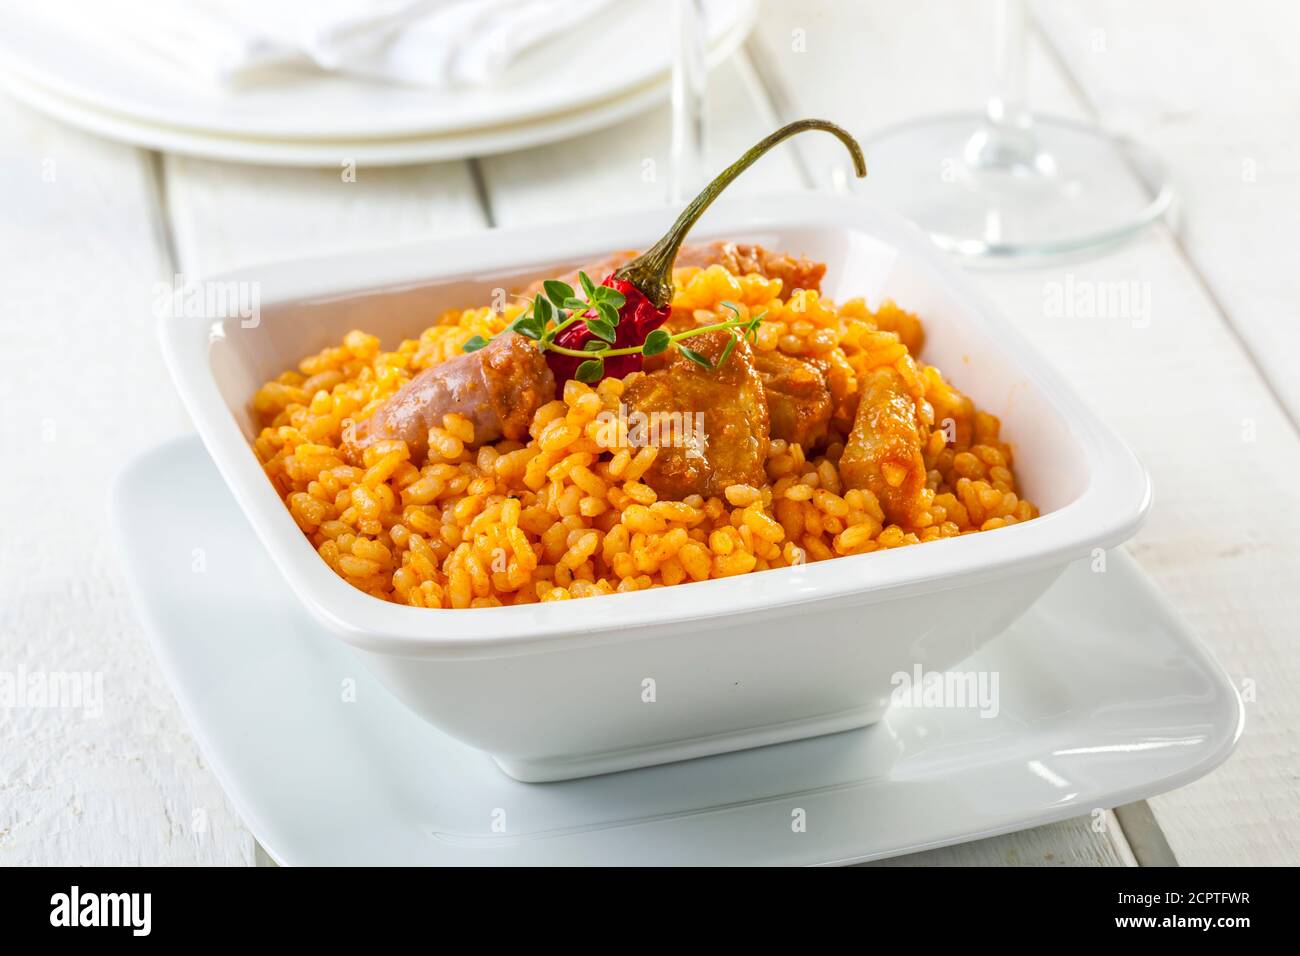 Spaicy rice dish with chicken and sausage Stock Photo